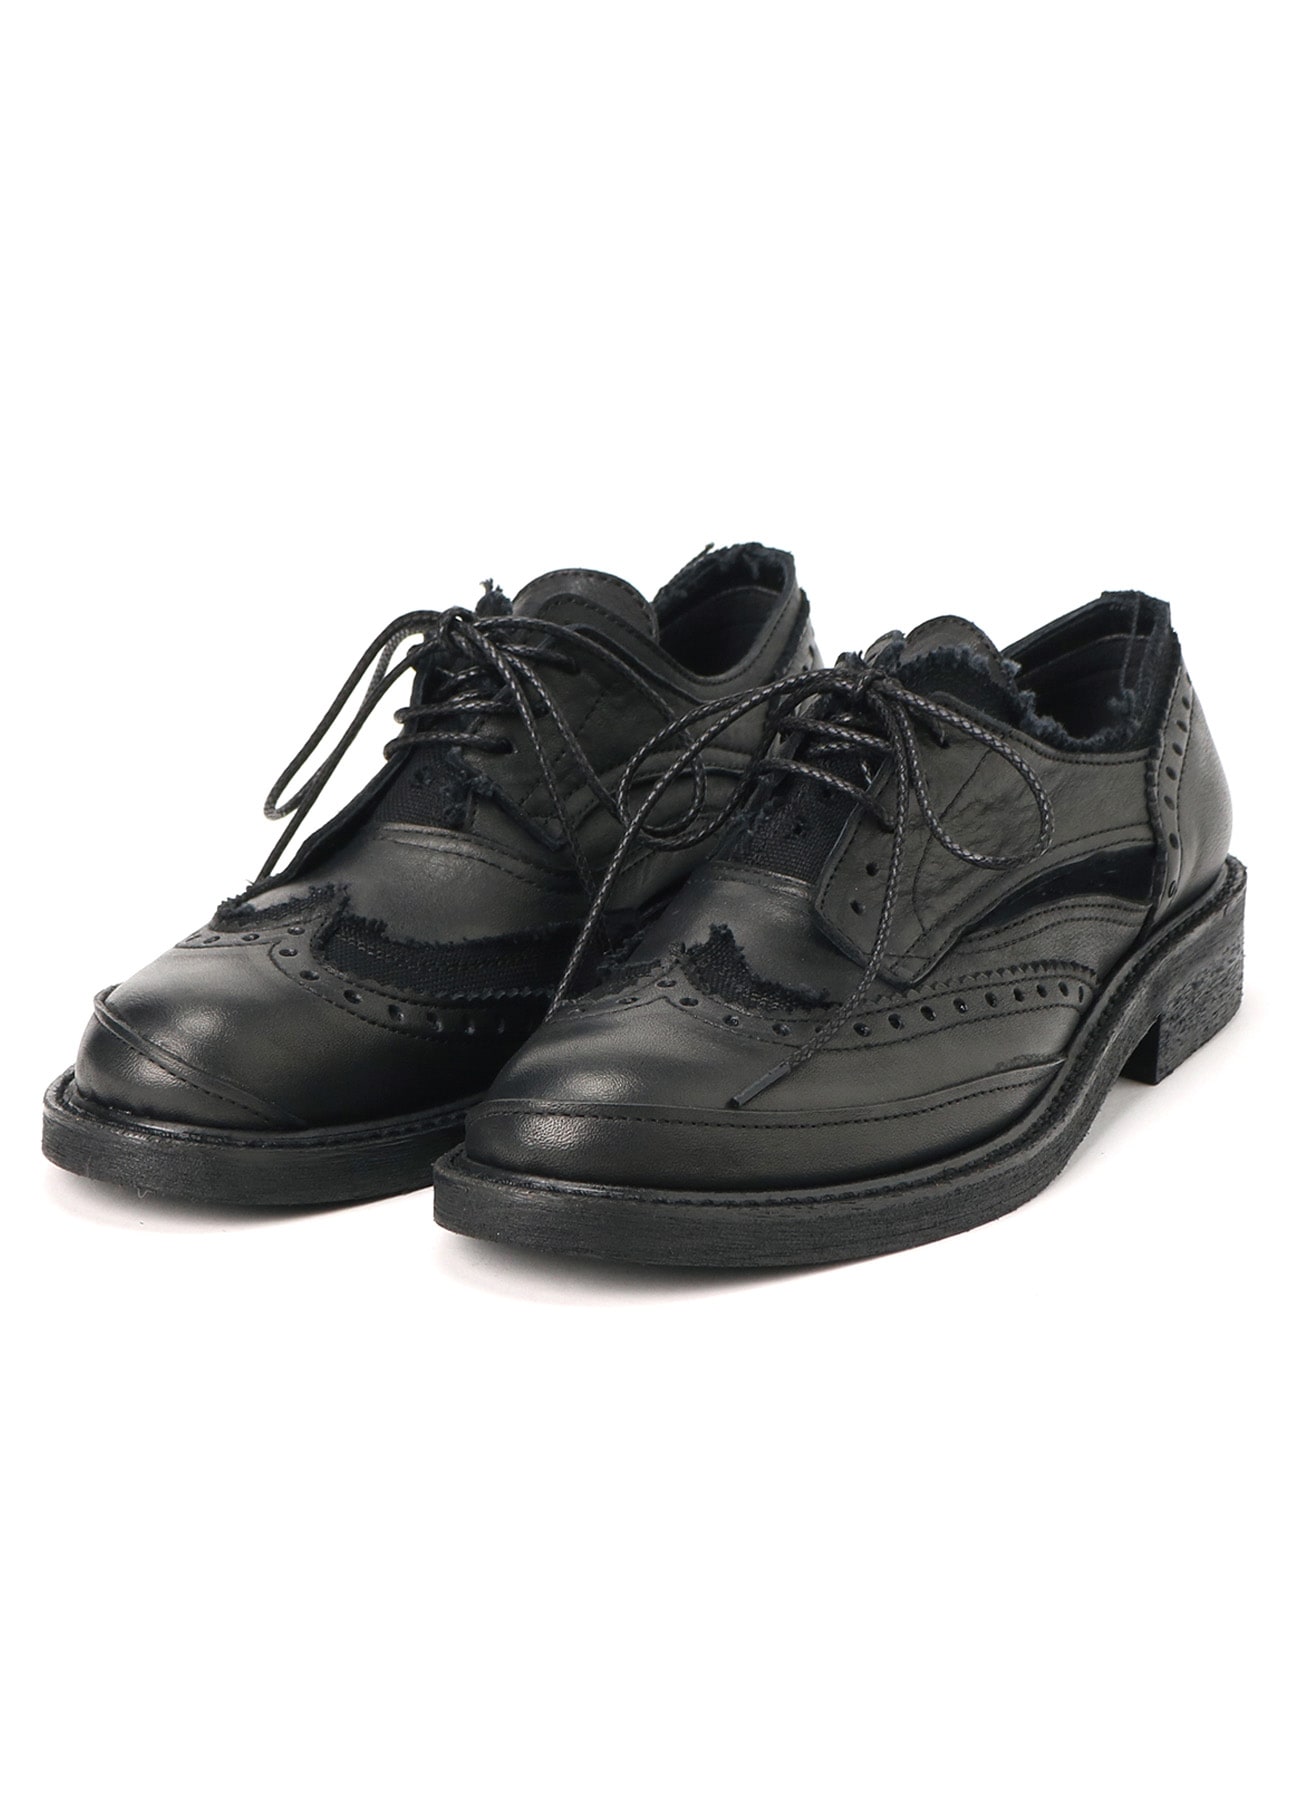 CANVAS/LEATHER COMBINATION WING CHIP SHOES(22.5 Black): Y's｜THE 